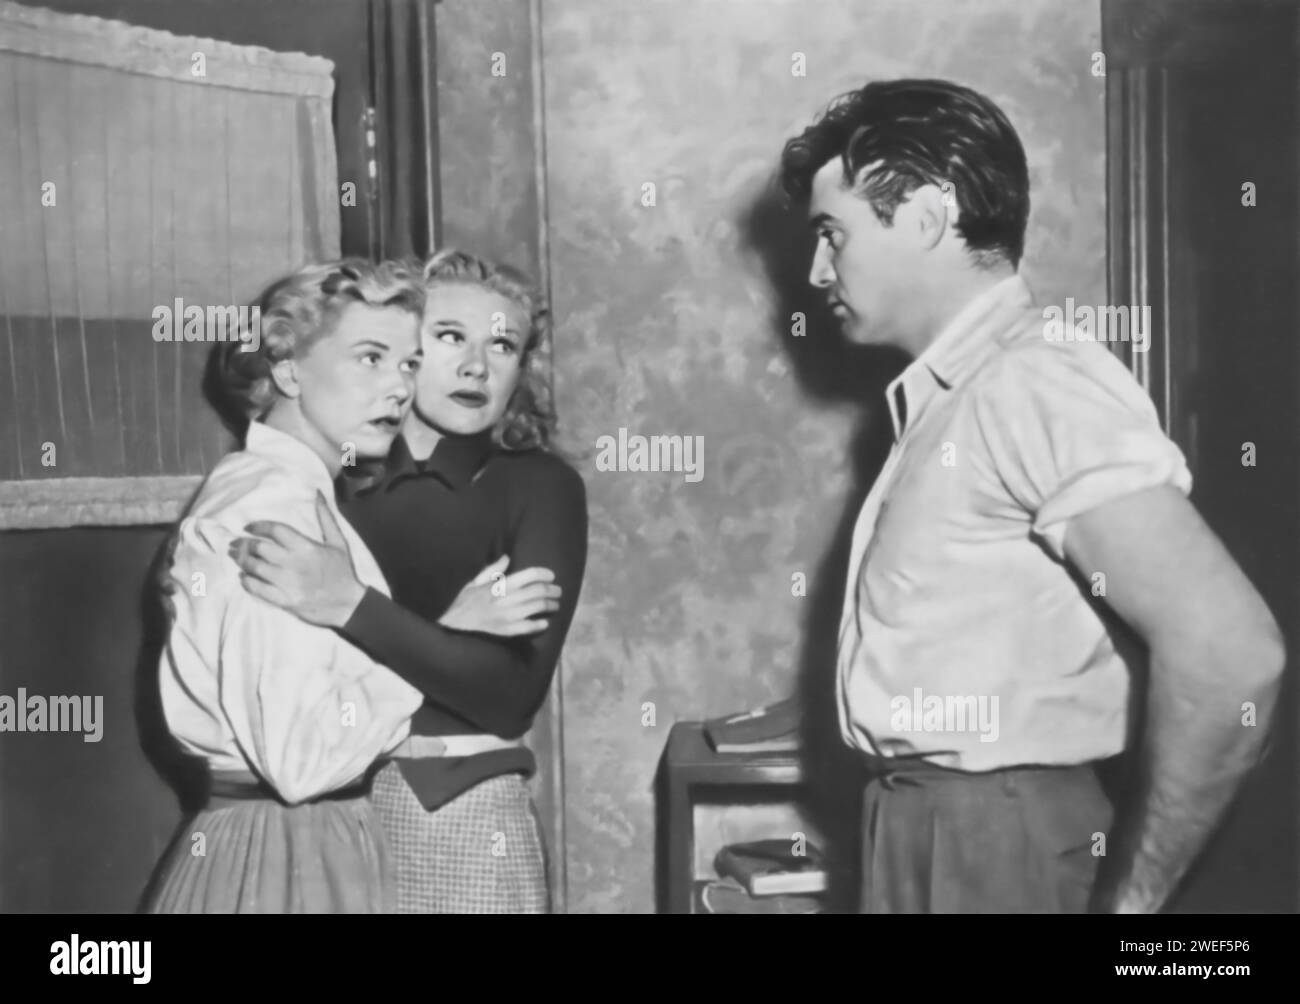 Ginger Rogers, Doris Day, and Steve Cochran star in 'Storm Warning' (1951), a film noir drama. In the movie, Rogers plays Marsha Mitchell, a model who accidentally witnesses a murder committed by the Ku Klux Klan in a small town. Day portrays her sister, Lucy Rice, who is unaware of her husband's (played by Cochran) involvement with the Klan. The film explores the themes of racism, corruption, and moral conflict as Marsha grapples with the decision to speak out against the Klan, despite the dangers and personal costs. Stock Photo